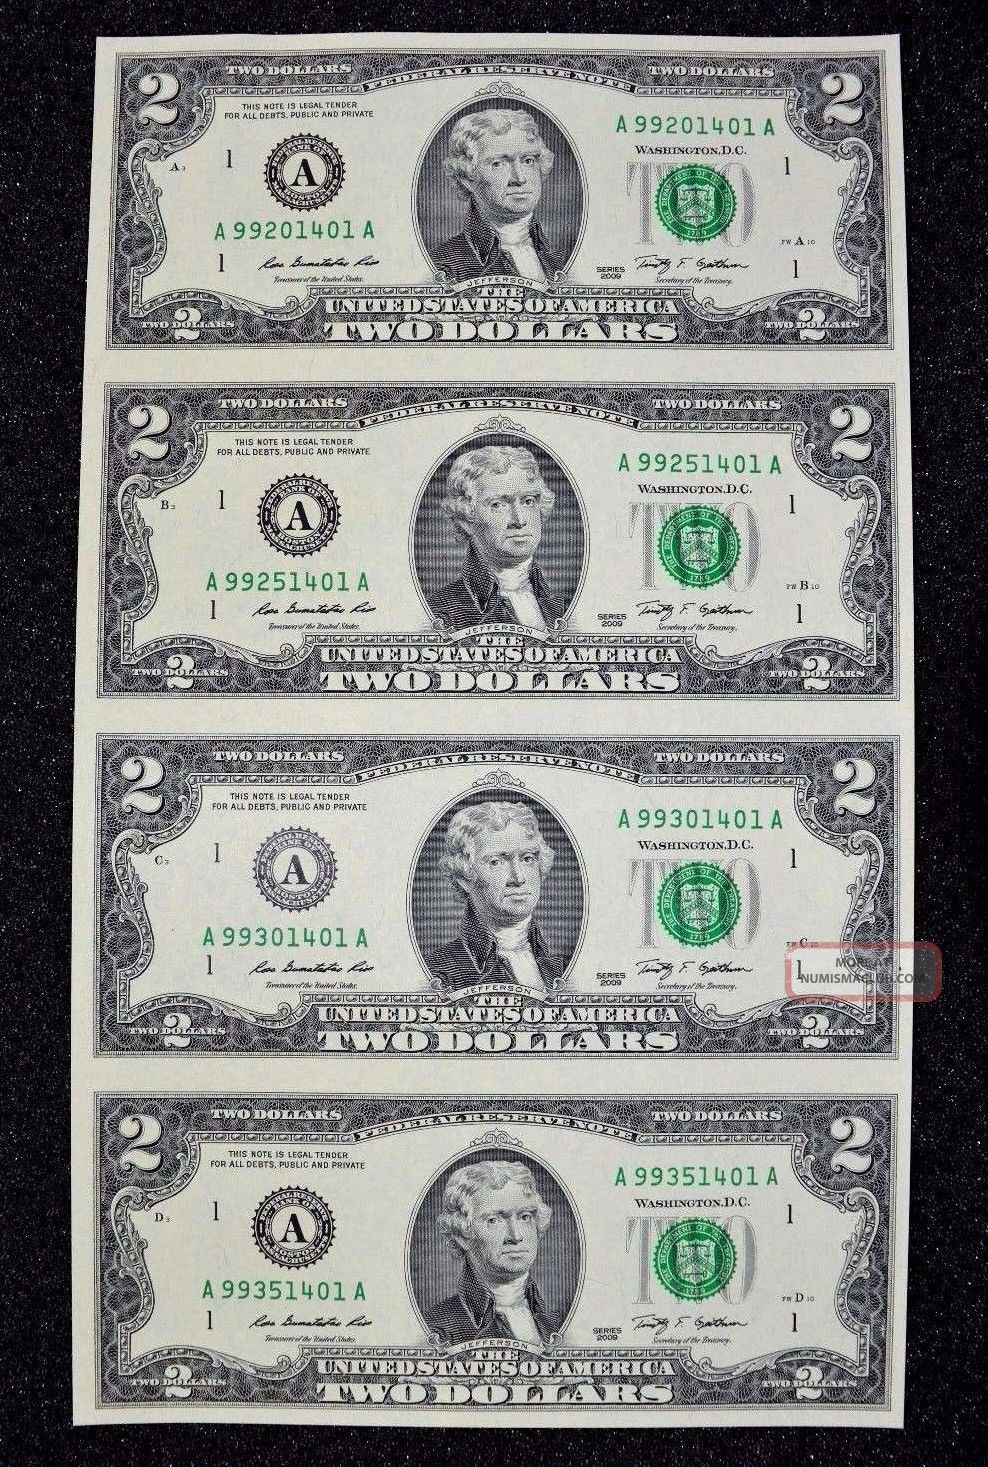 Uncut Sheet $2 Two Dollar Bills (x4) U.  S Uncut Currency Uncirculated 2009 Pm267 Small Size Notes photo